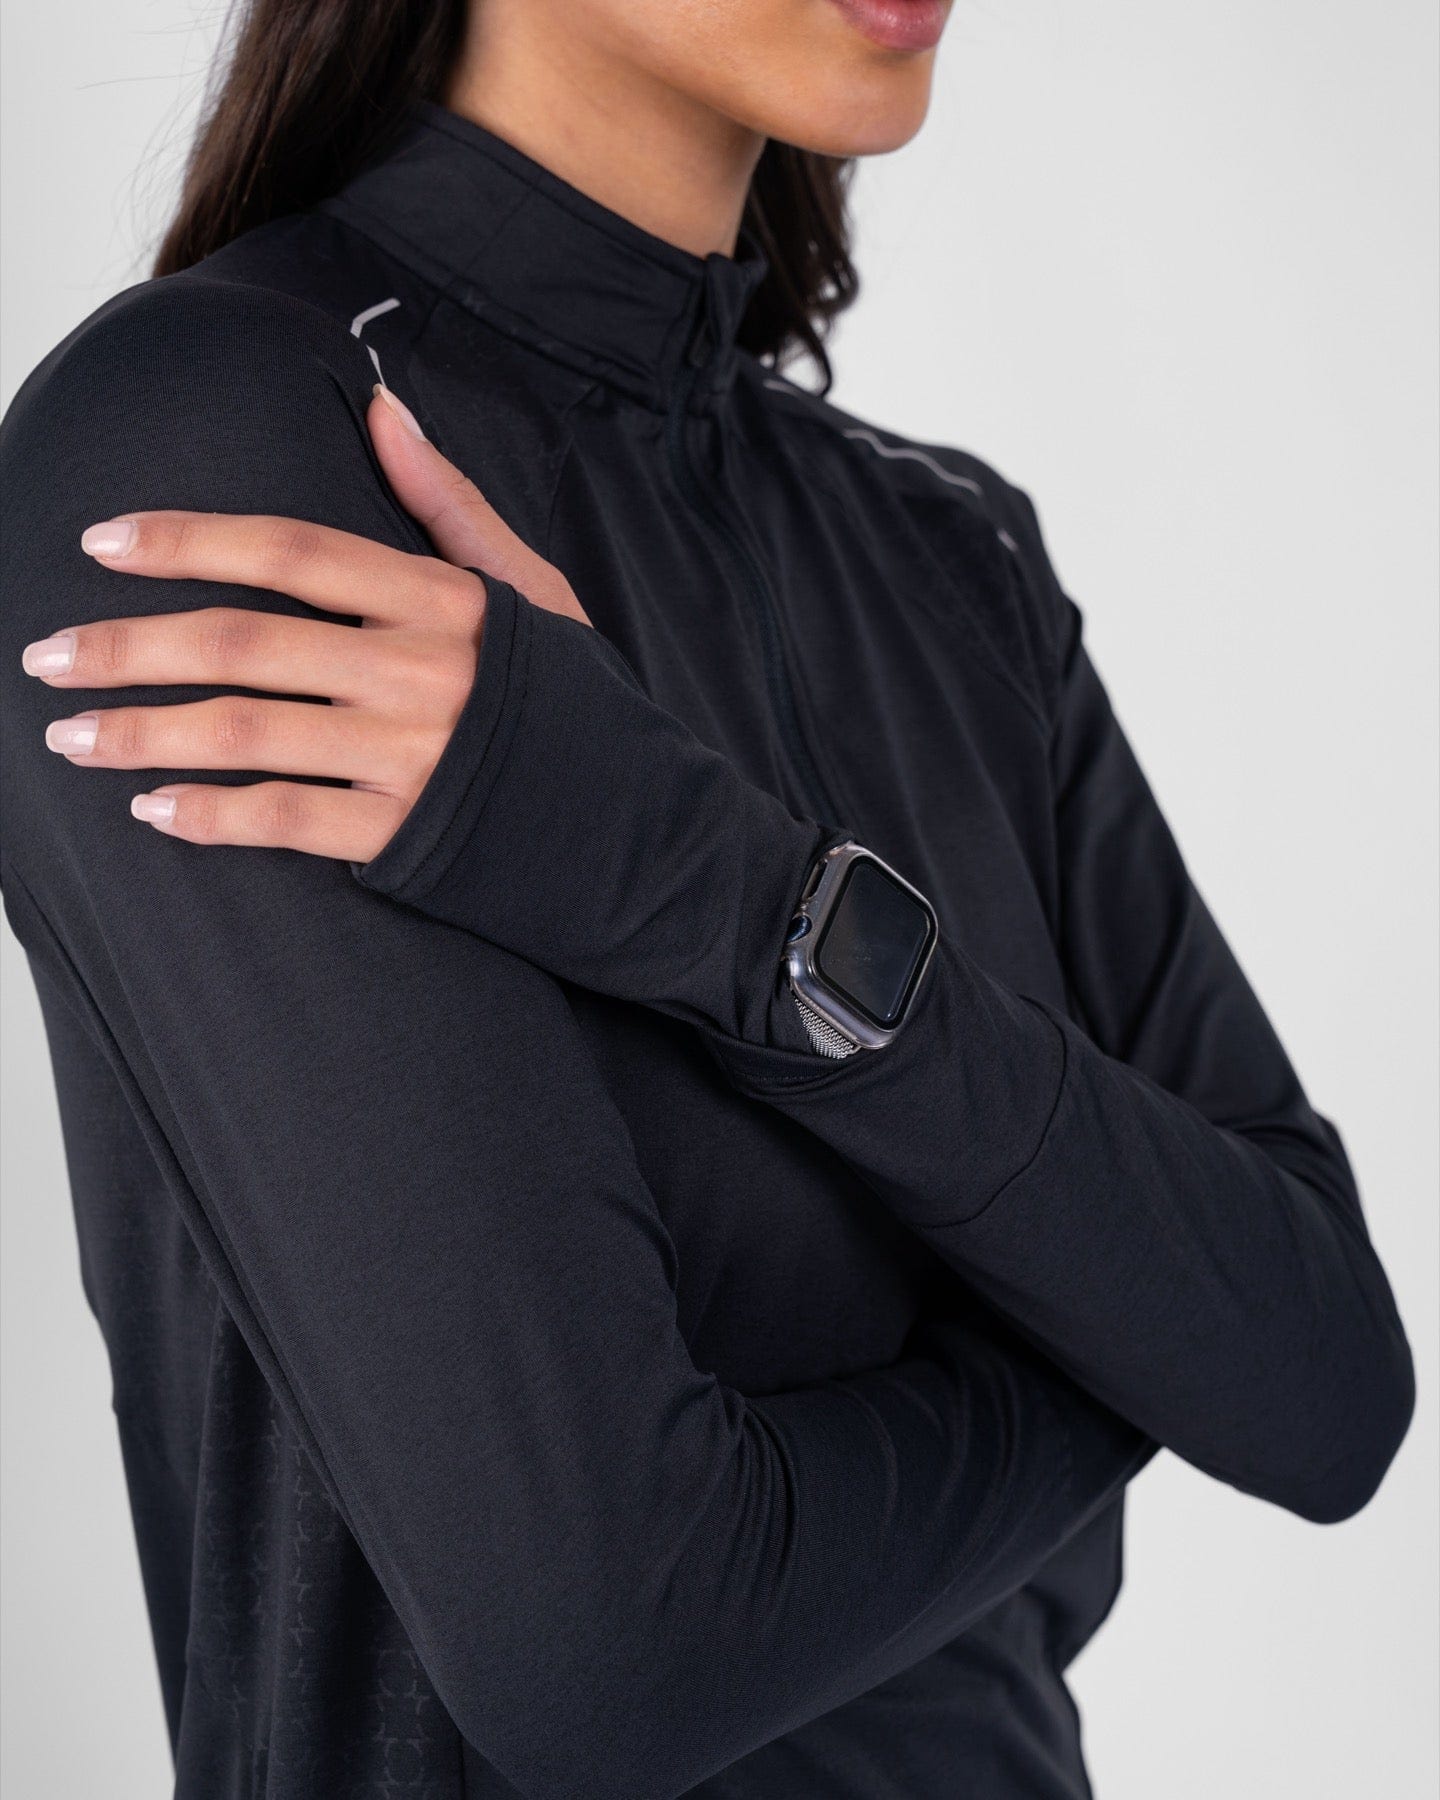 Close-up of a model wearing black high neck long sleeve shirt ARMA by Qynda with moisture-resistant fabric technology, sporting a smartwatch on her wrist, hand resting on her shoulder, against a grey background.